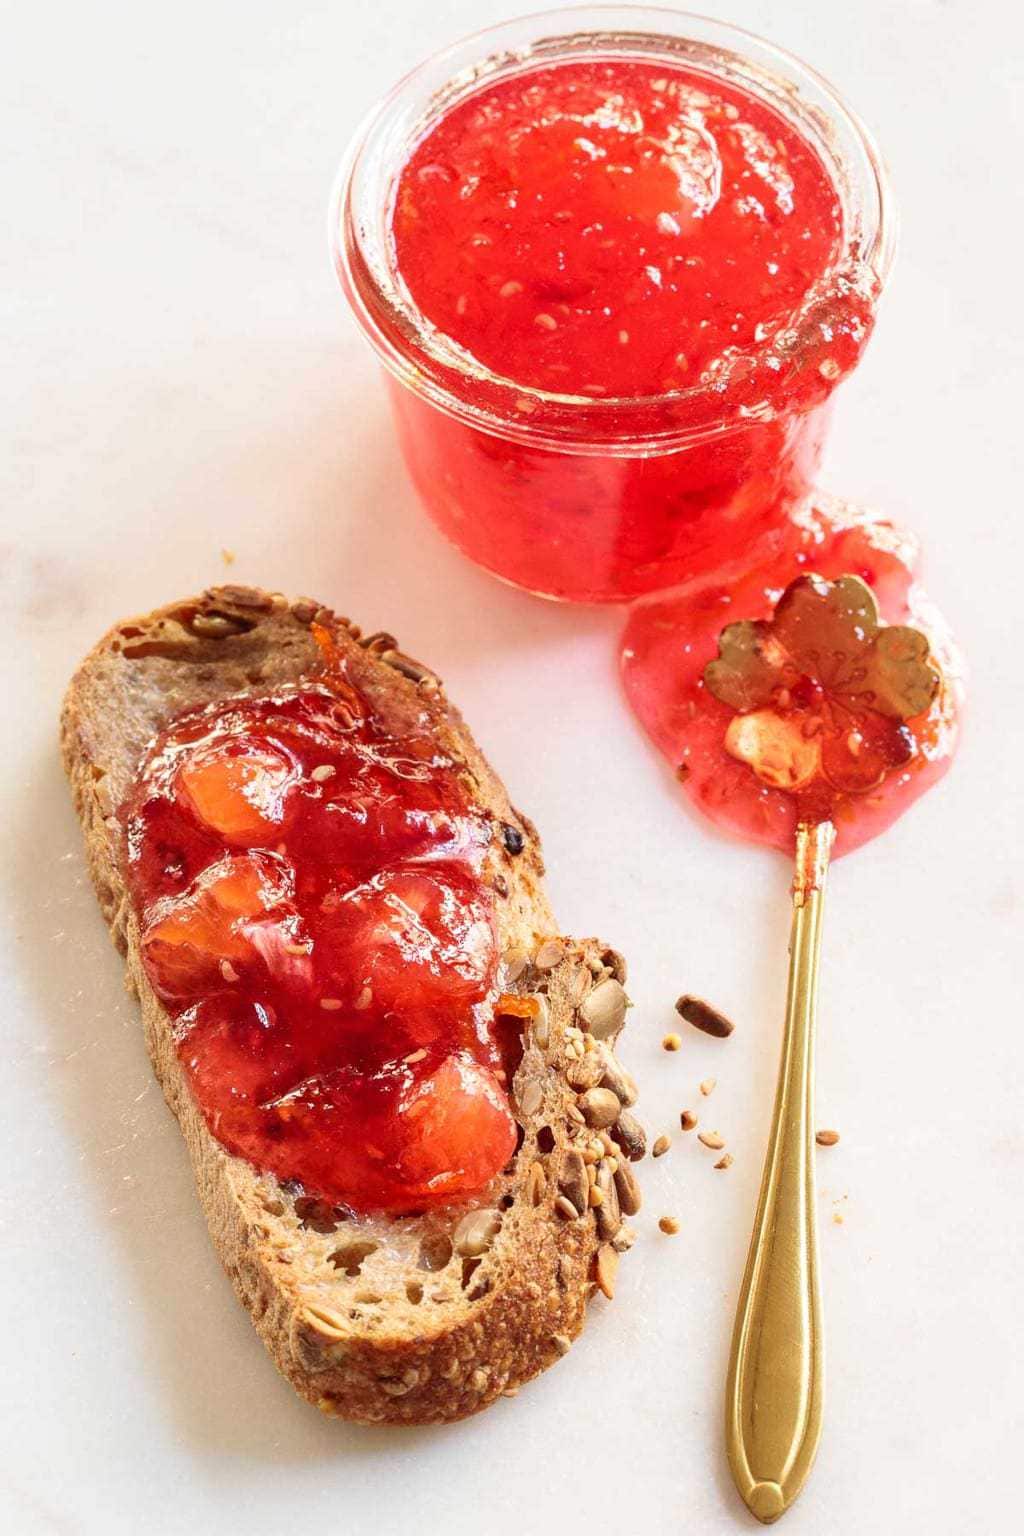 Overhead vertical photo of Raspberry Meyer Lemon Marmalade in a glass jar and also spread on toast with a small gold serving spoon.